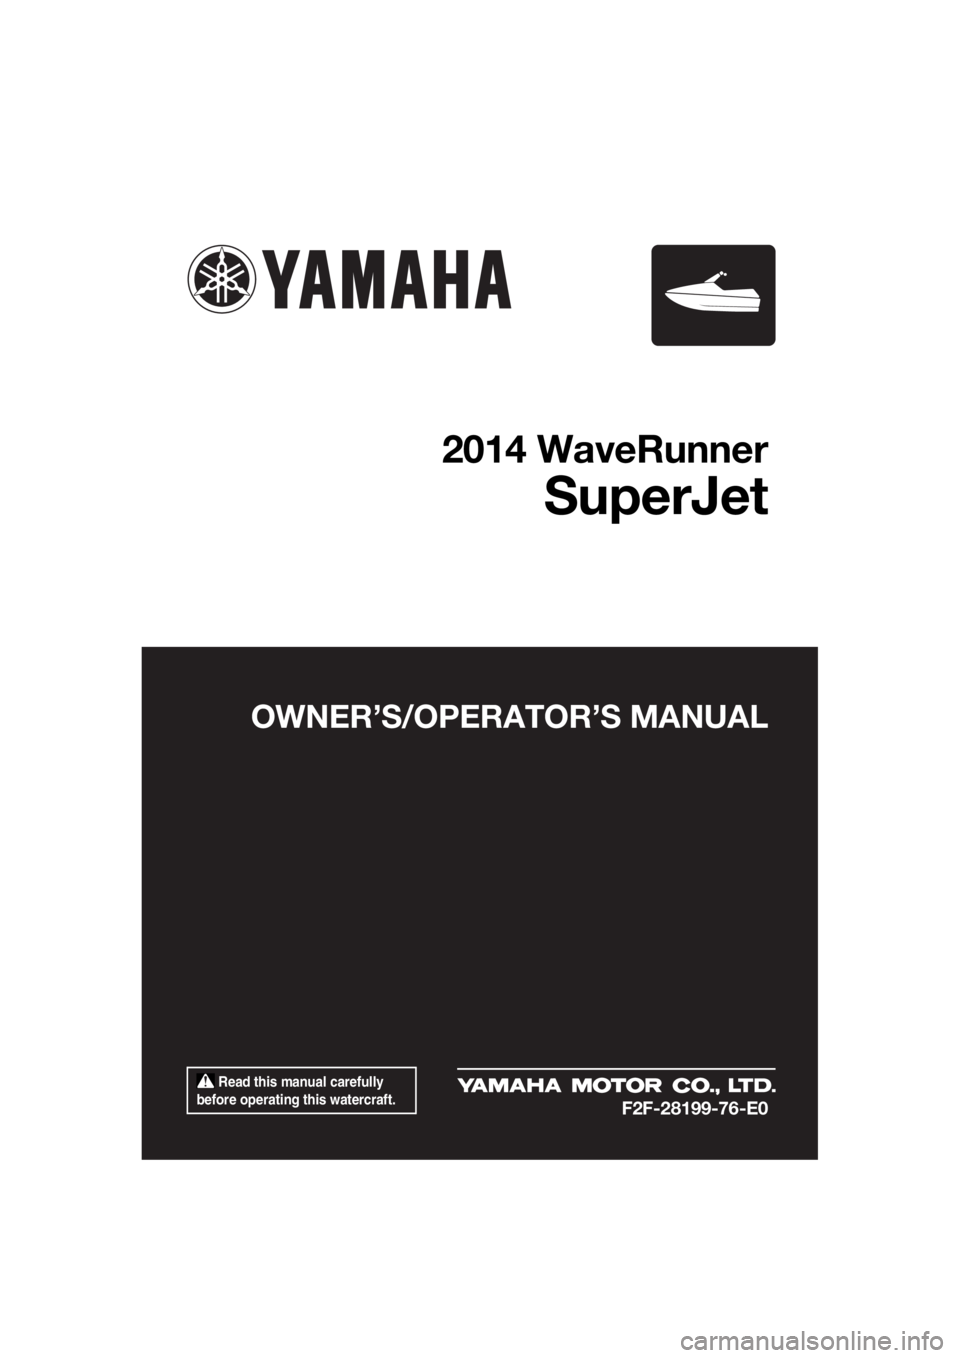 YAMAHA SUPERJET 2014  Owners Manual  Read this manual carefully 
before operating this watercraft.
OWNER’S/OPERATOR’S MANUAL
2014 WaveRunner
SuperJet
F2F-28199-76-E0
UF2F76E0.book  Page 1  Thursday, May 9, 2013  3:52 PM 